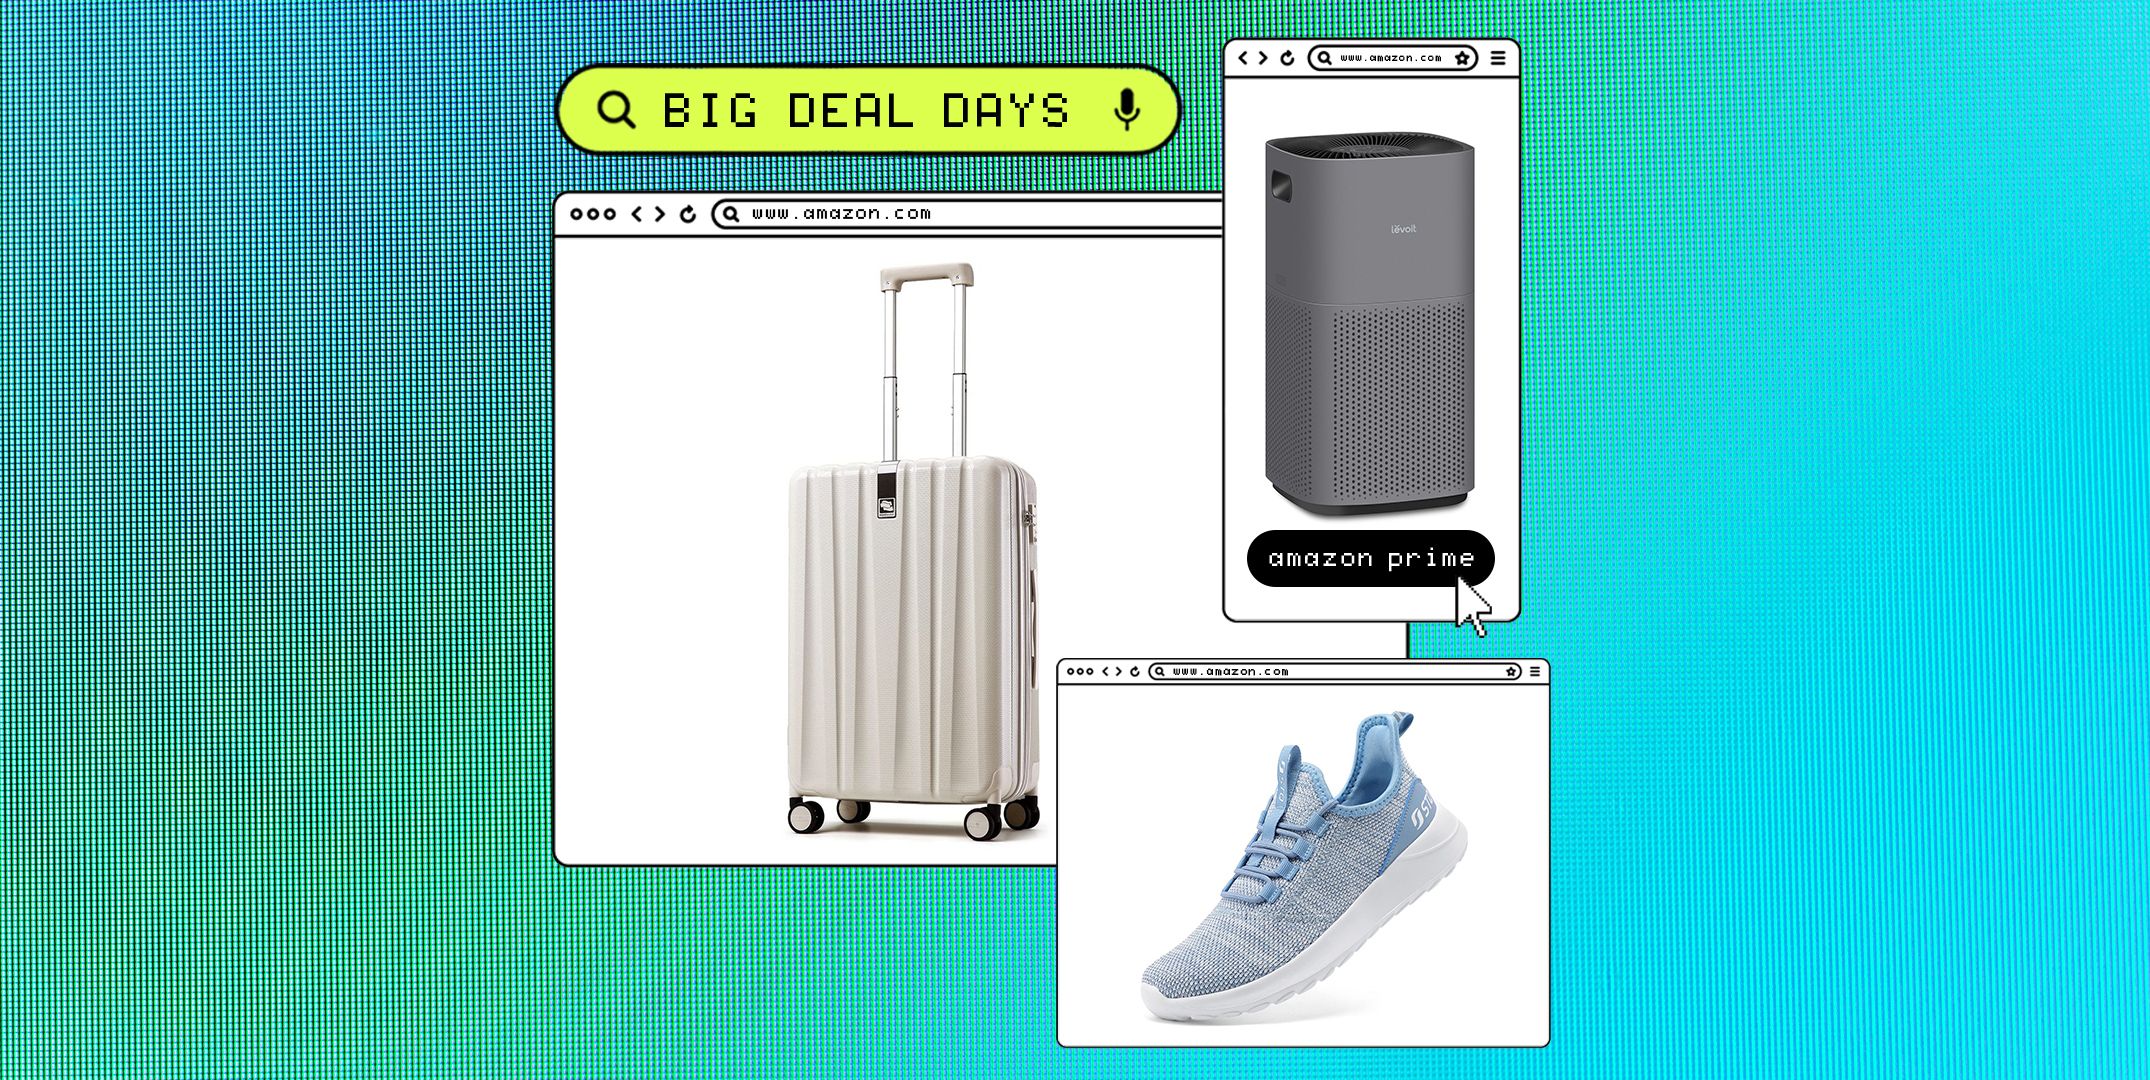   Outlet Prime Big Deal Days,Deals of The Day Lightning  Deals Today Prime,Clearance of Sales Today Deals Primeprime Deals of The  Day Today only : Sports & Outdoors